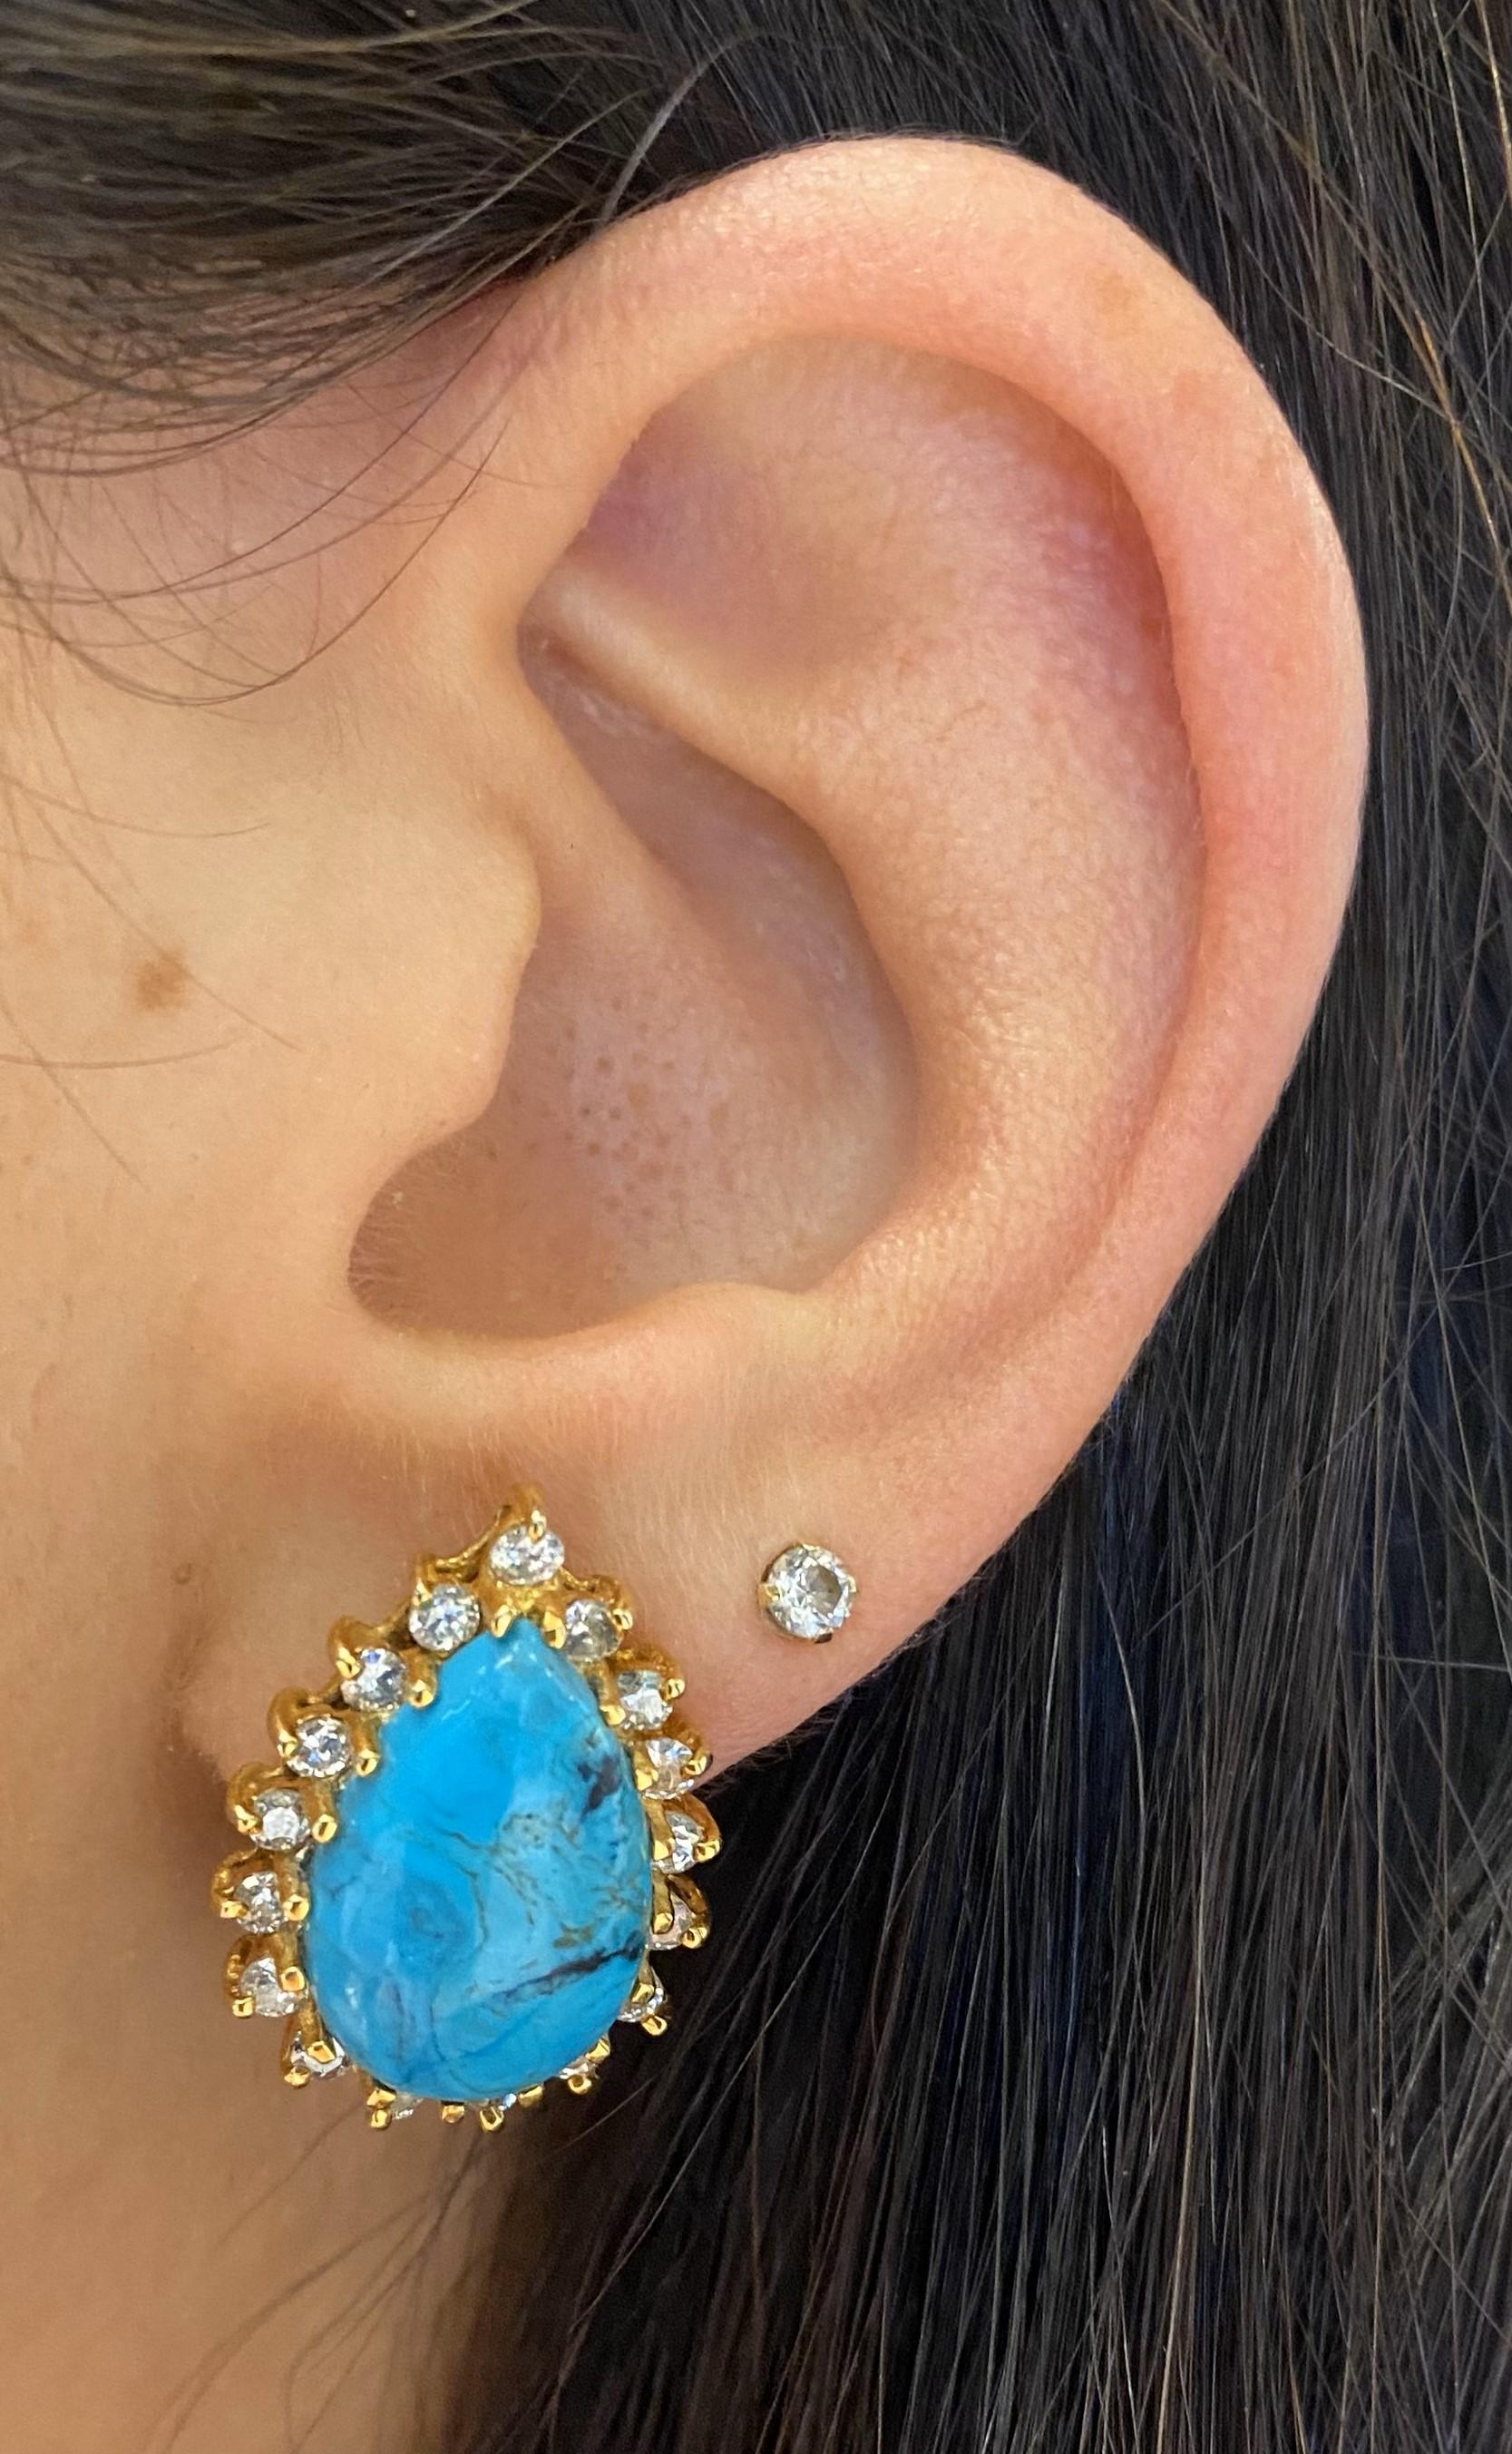 Turquoise and Diamond Earrings

Pear shape turquoise earrings set with 34 round cut diamonds

Approximate Combined Diamond Weight: 1 carat
Approximately Length: 1 inch 
Back Type: push back